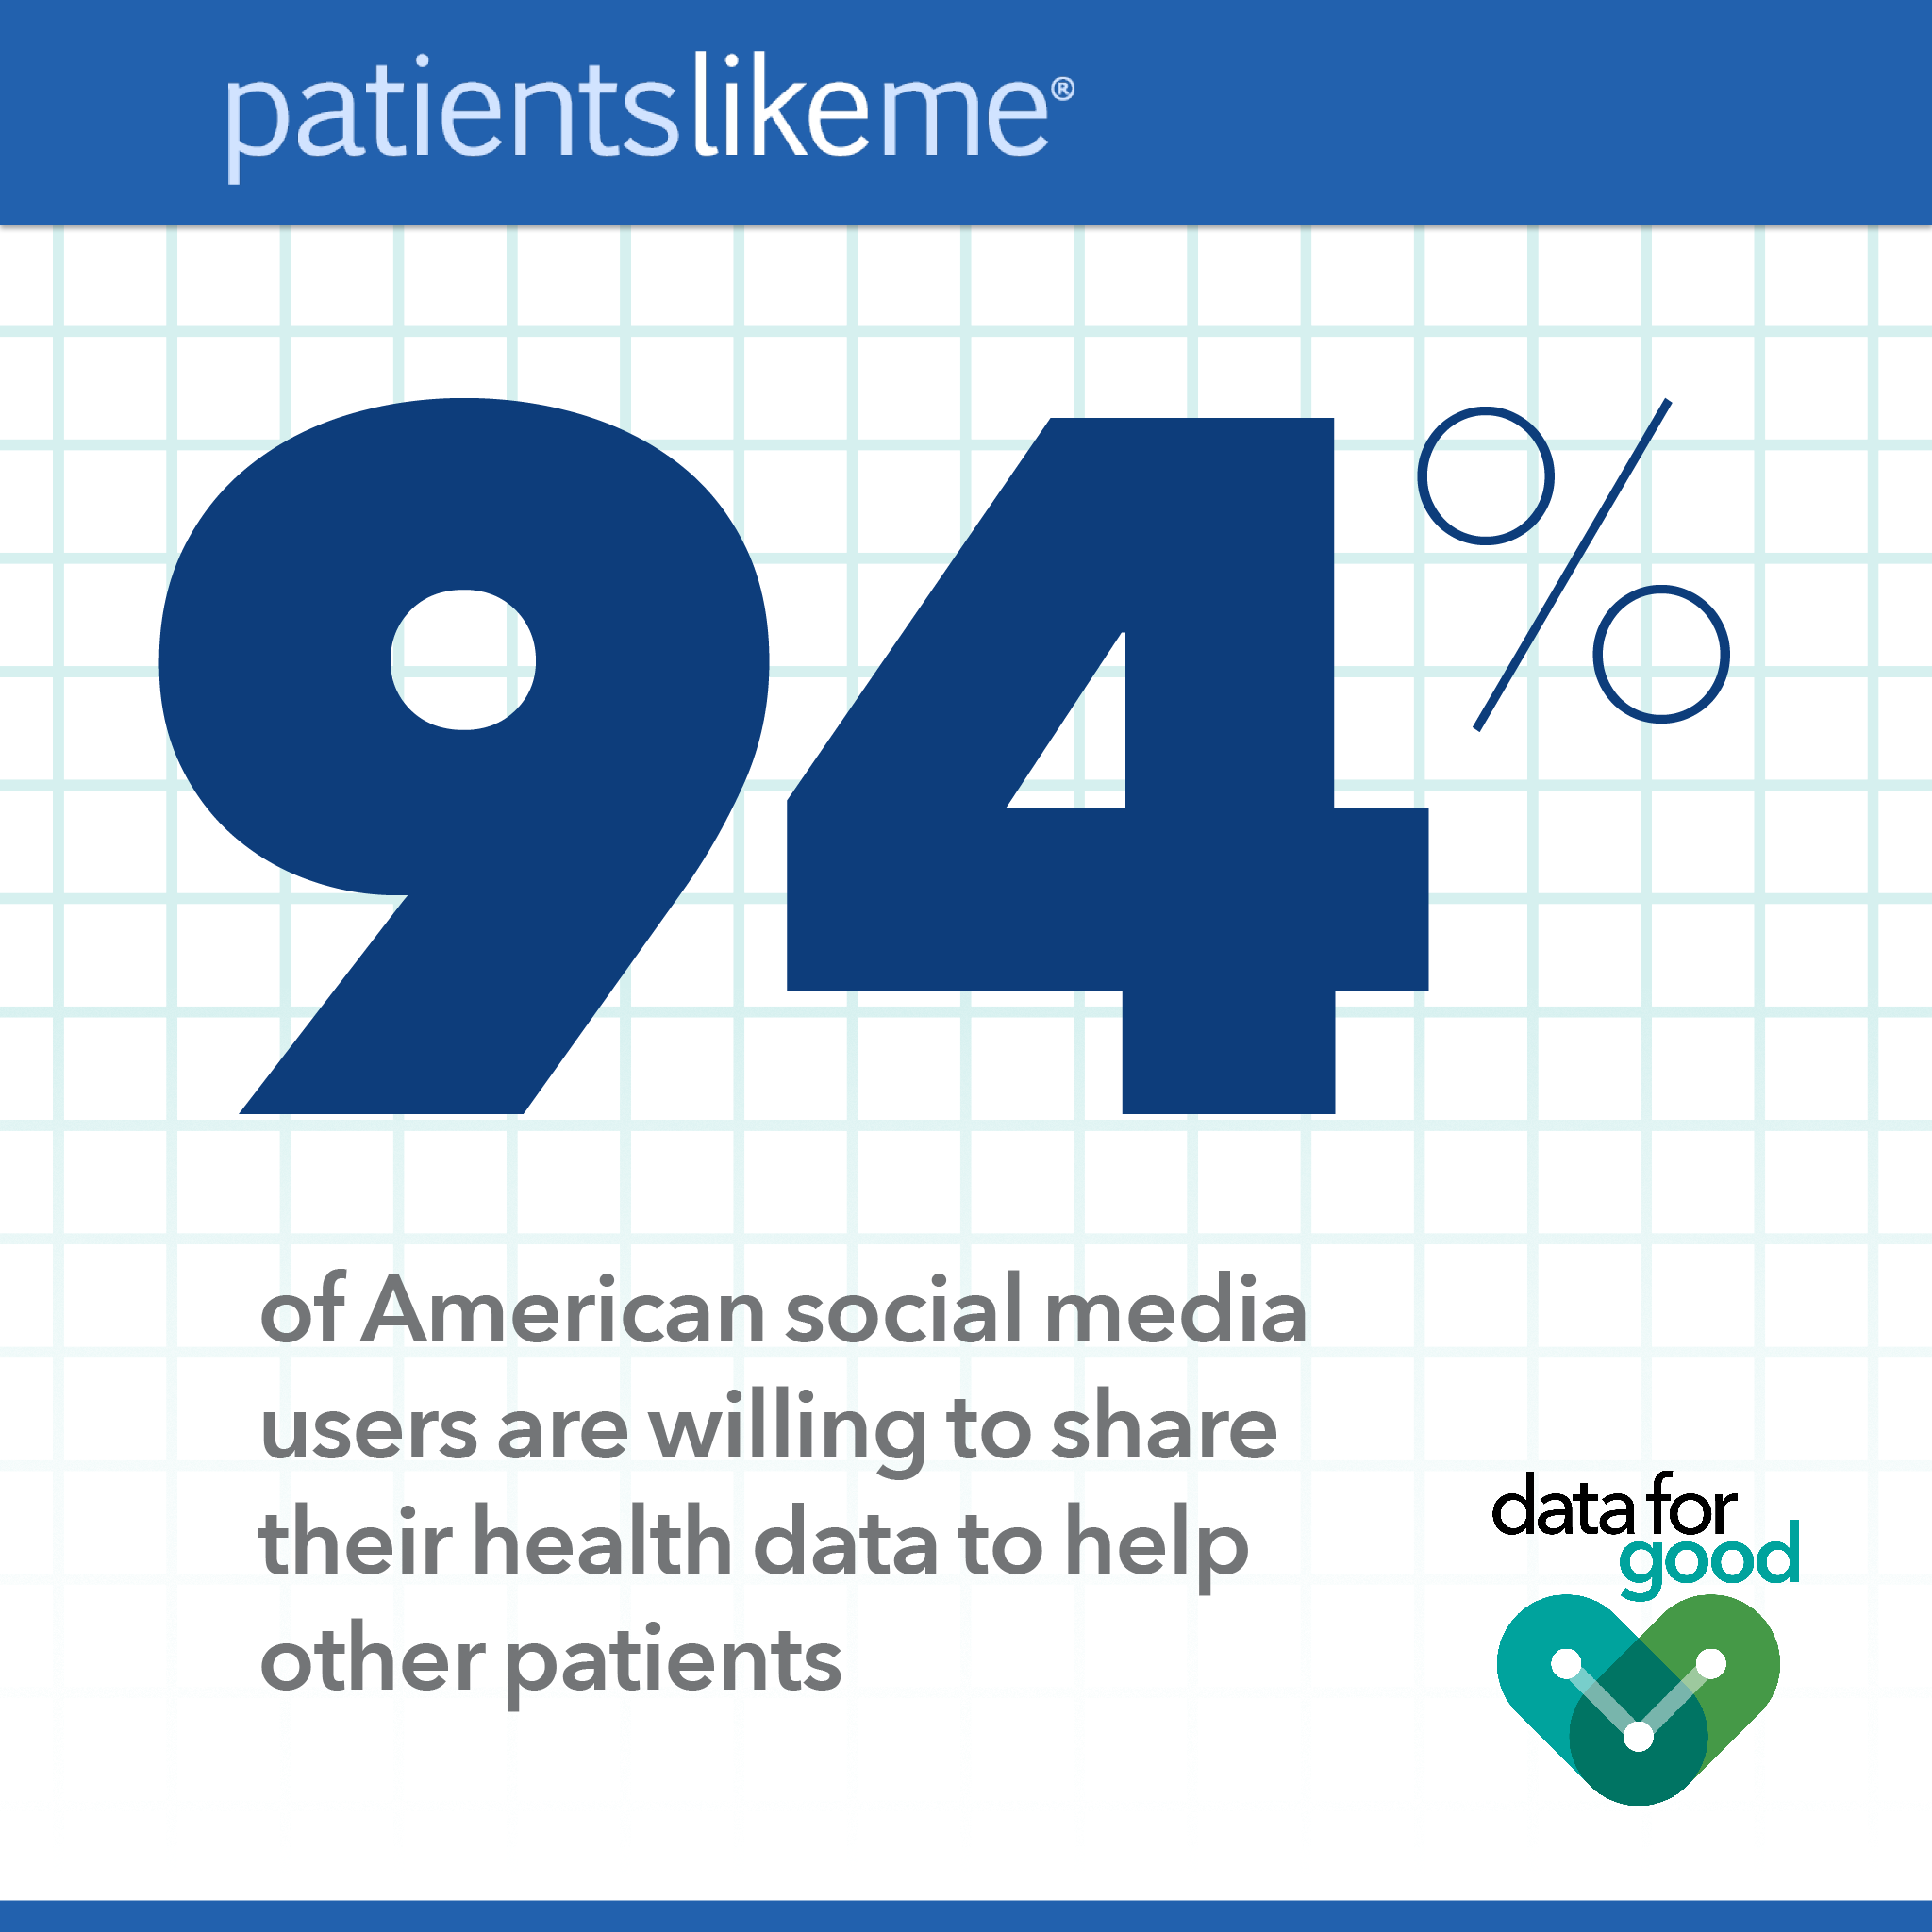 A graphic developed by PatientsLikeMe